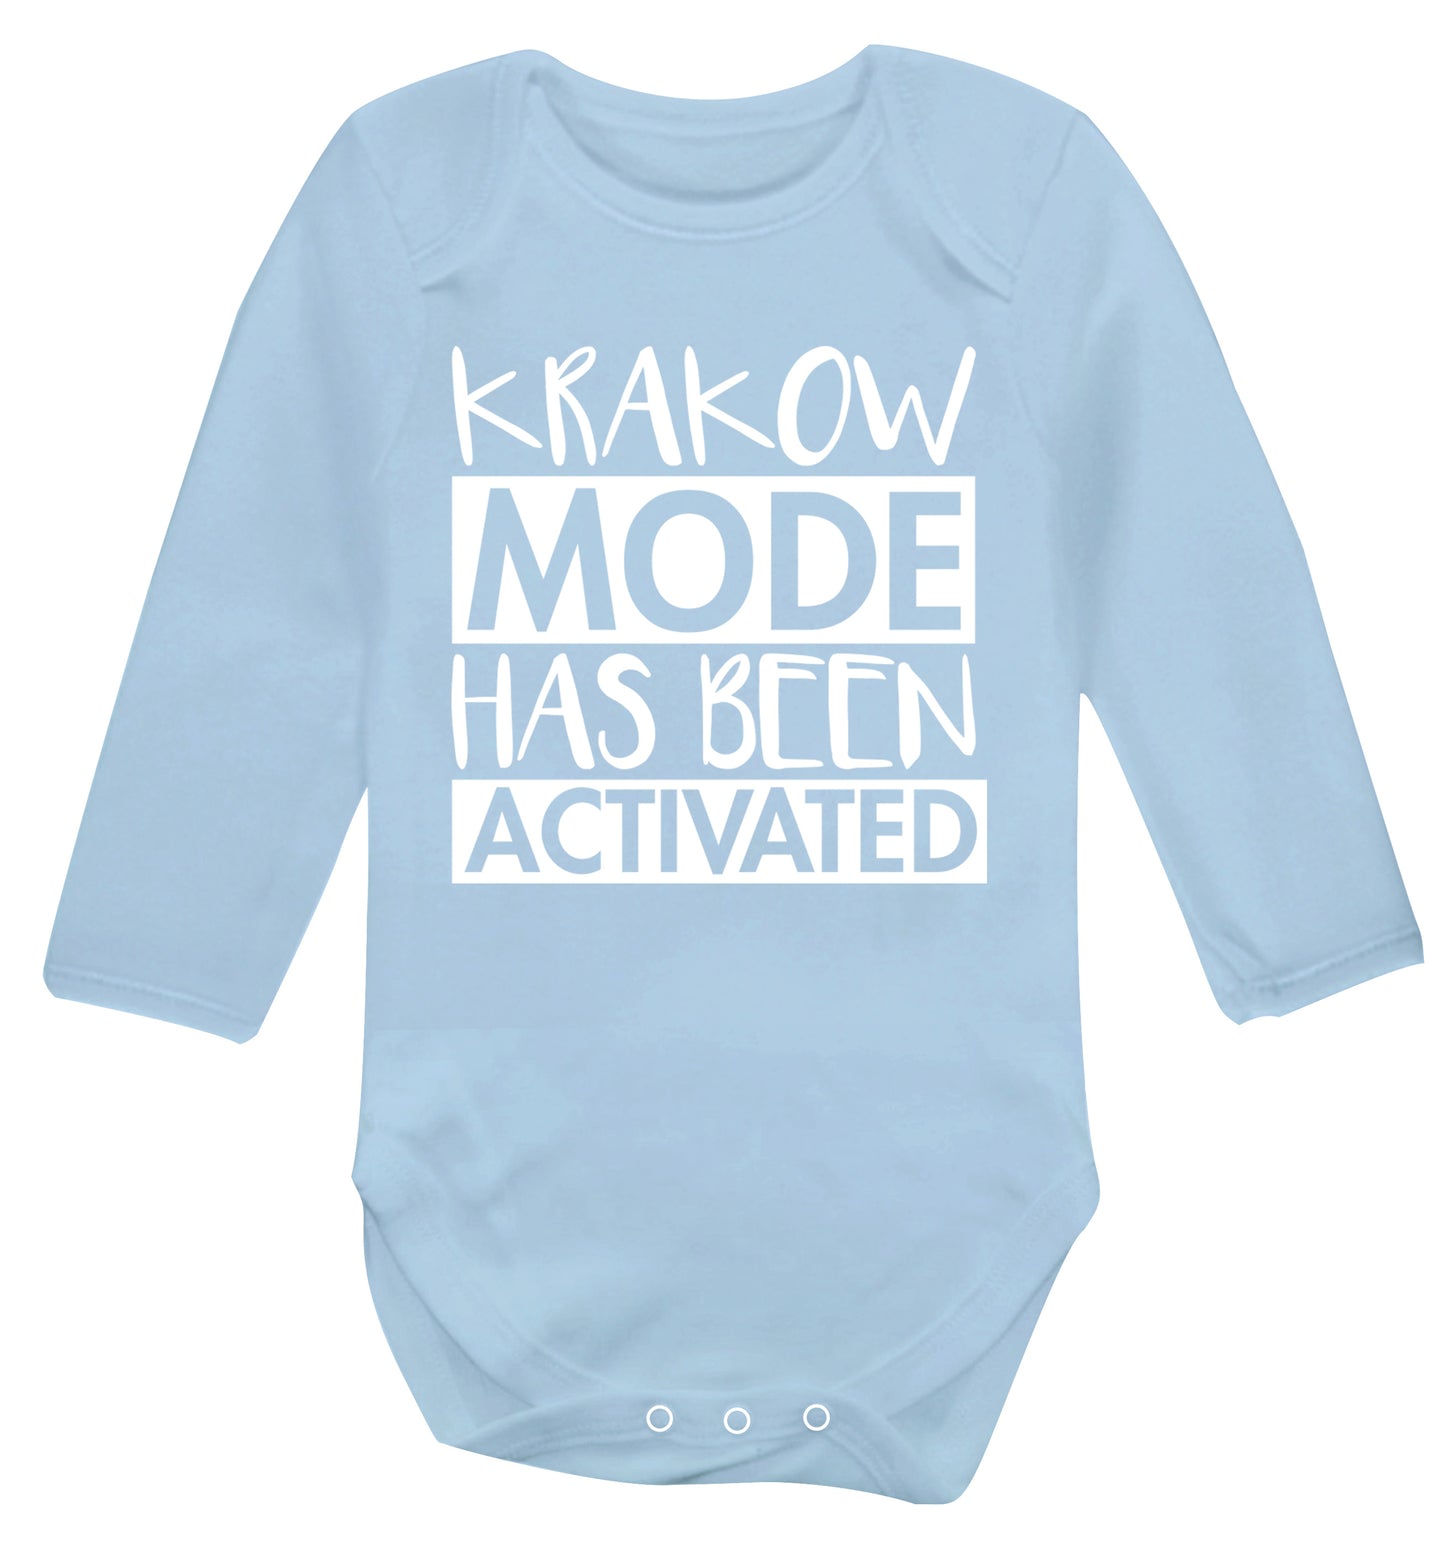 Krakow mode has been activated Baby Vest long sleeved pale blue 6-12 months